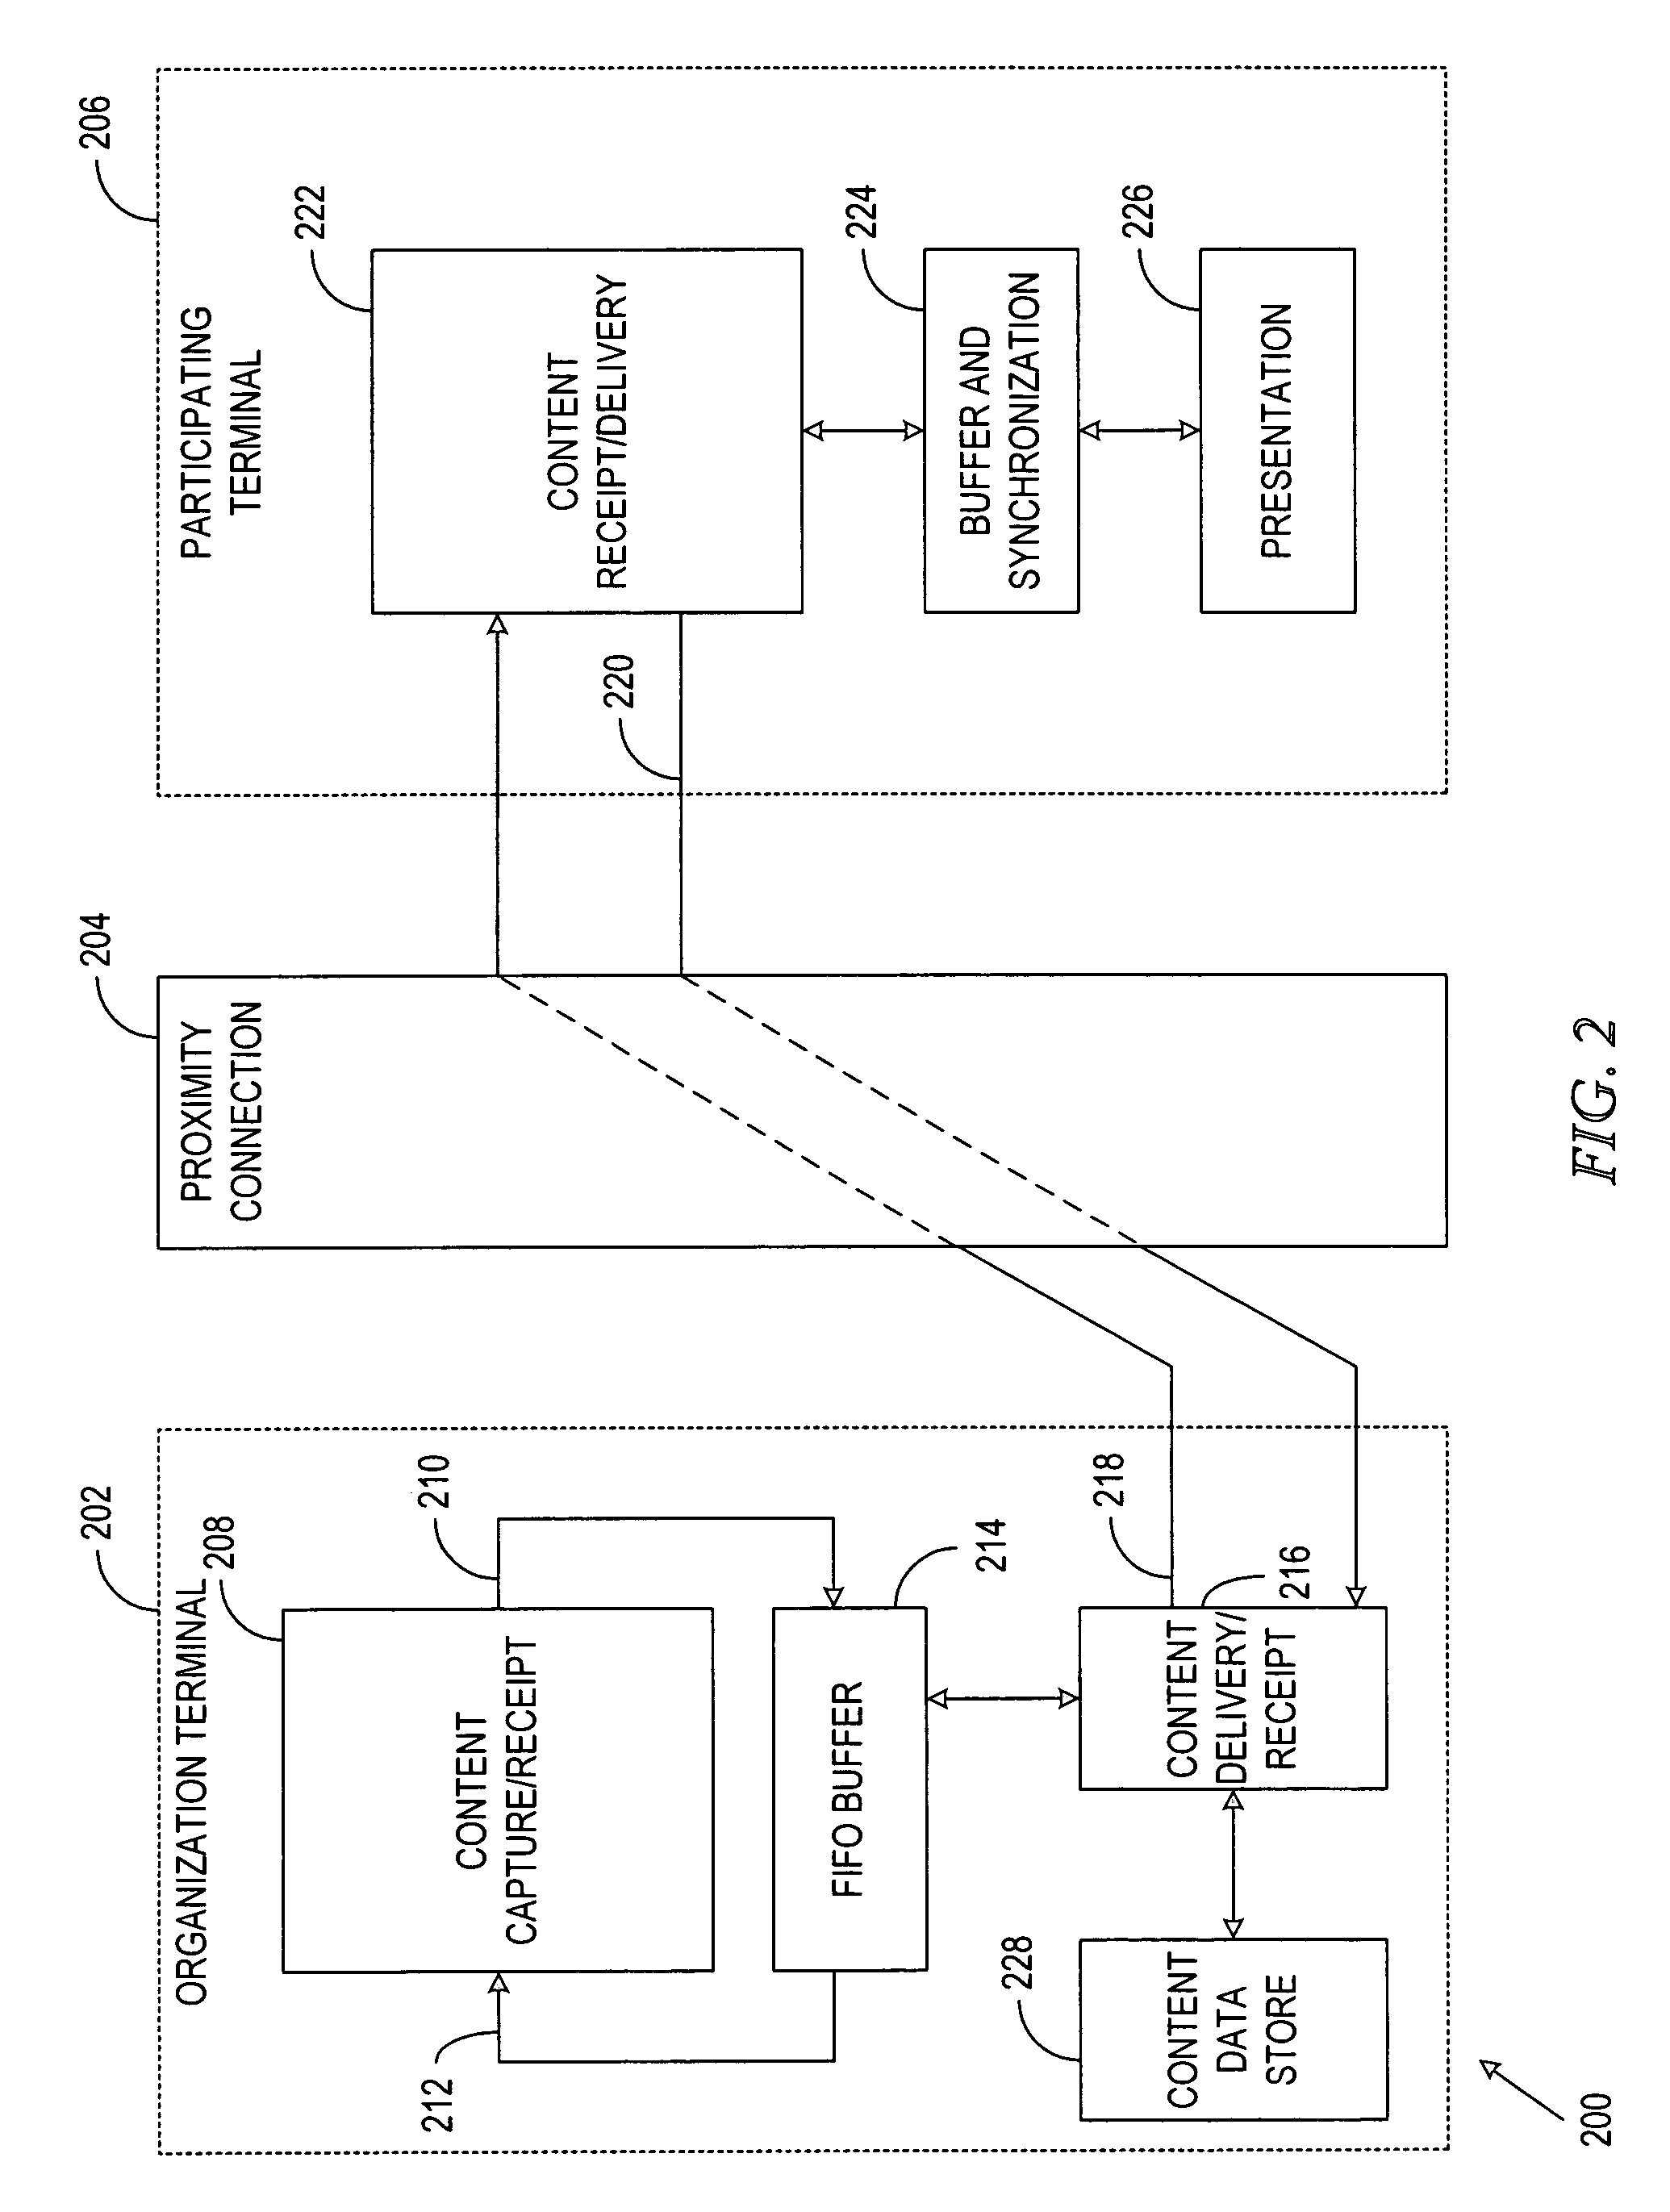 Method and system for location based group formation